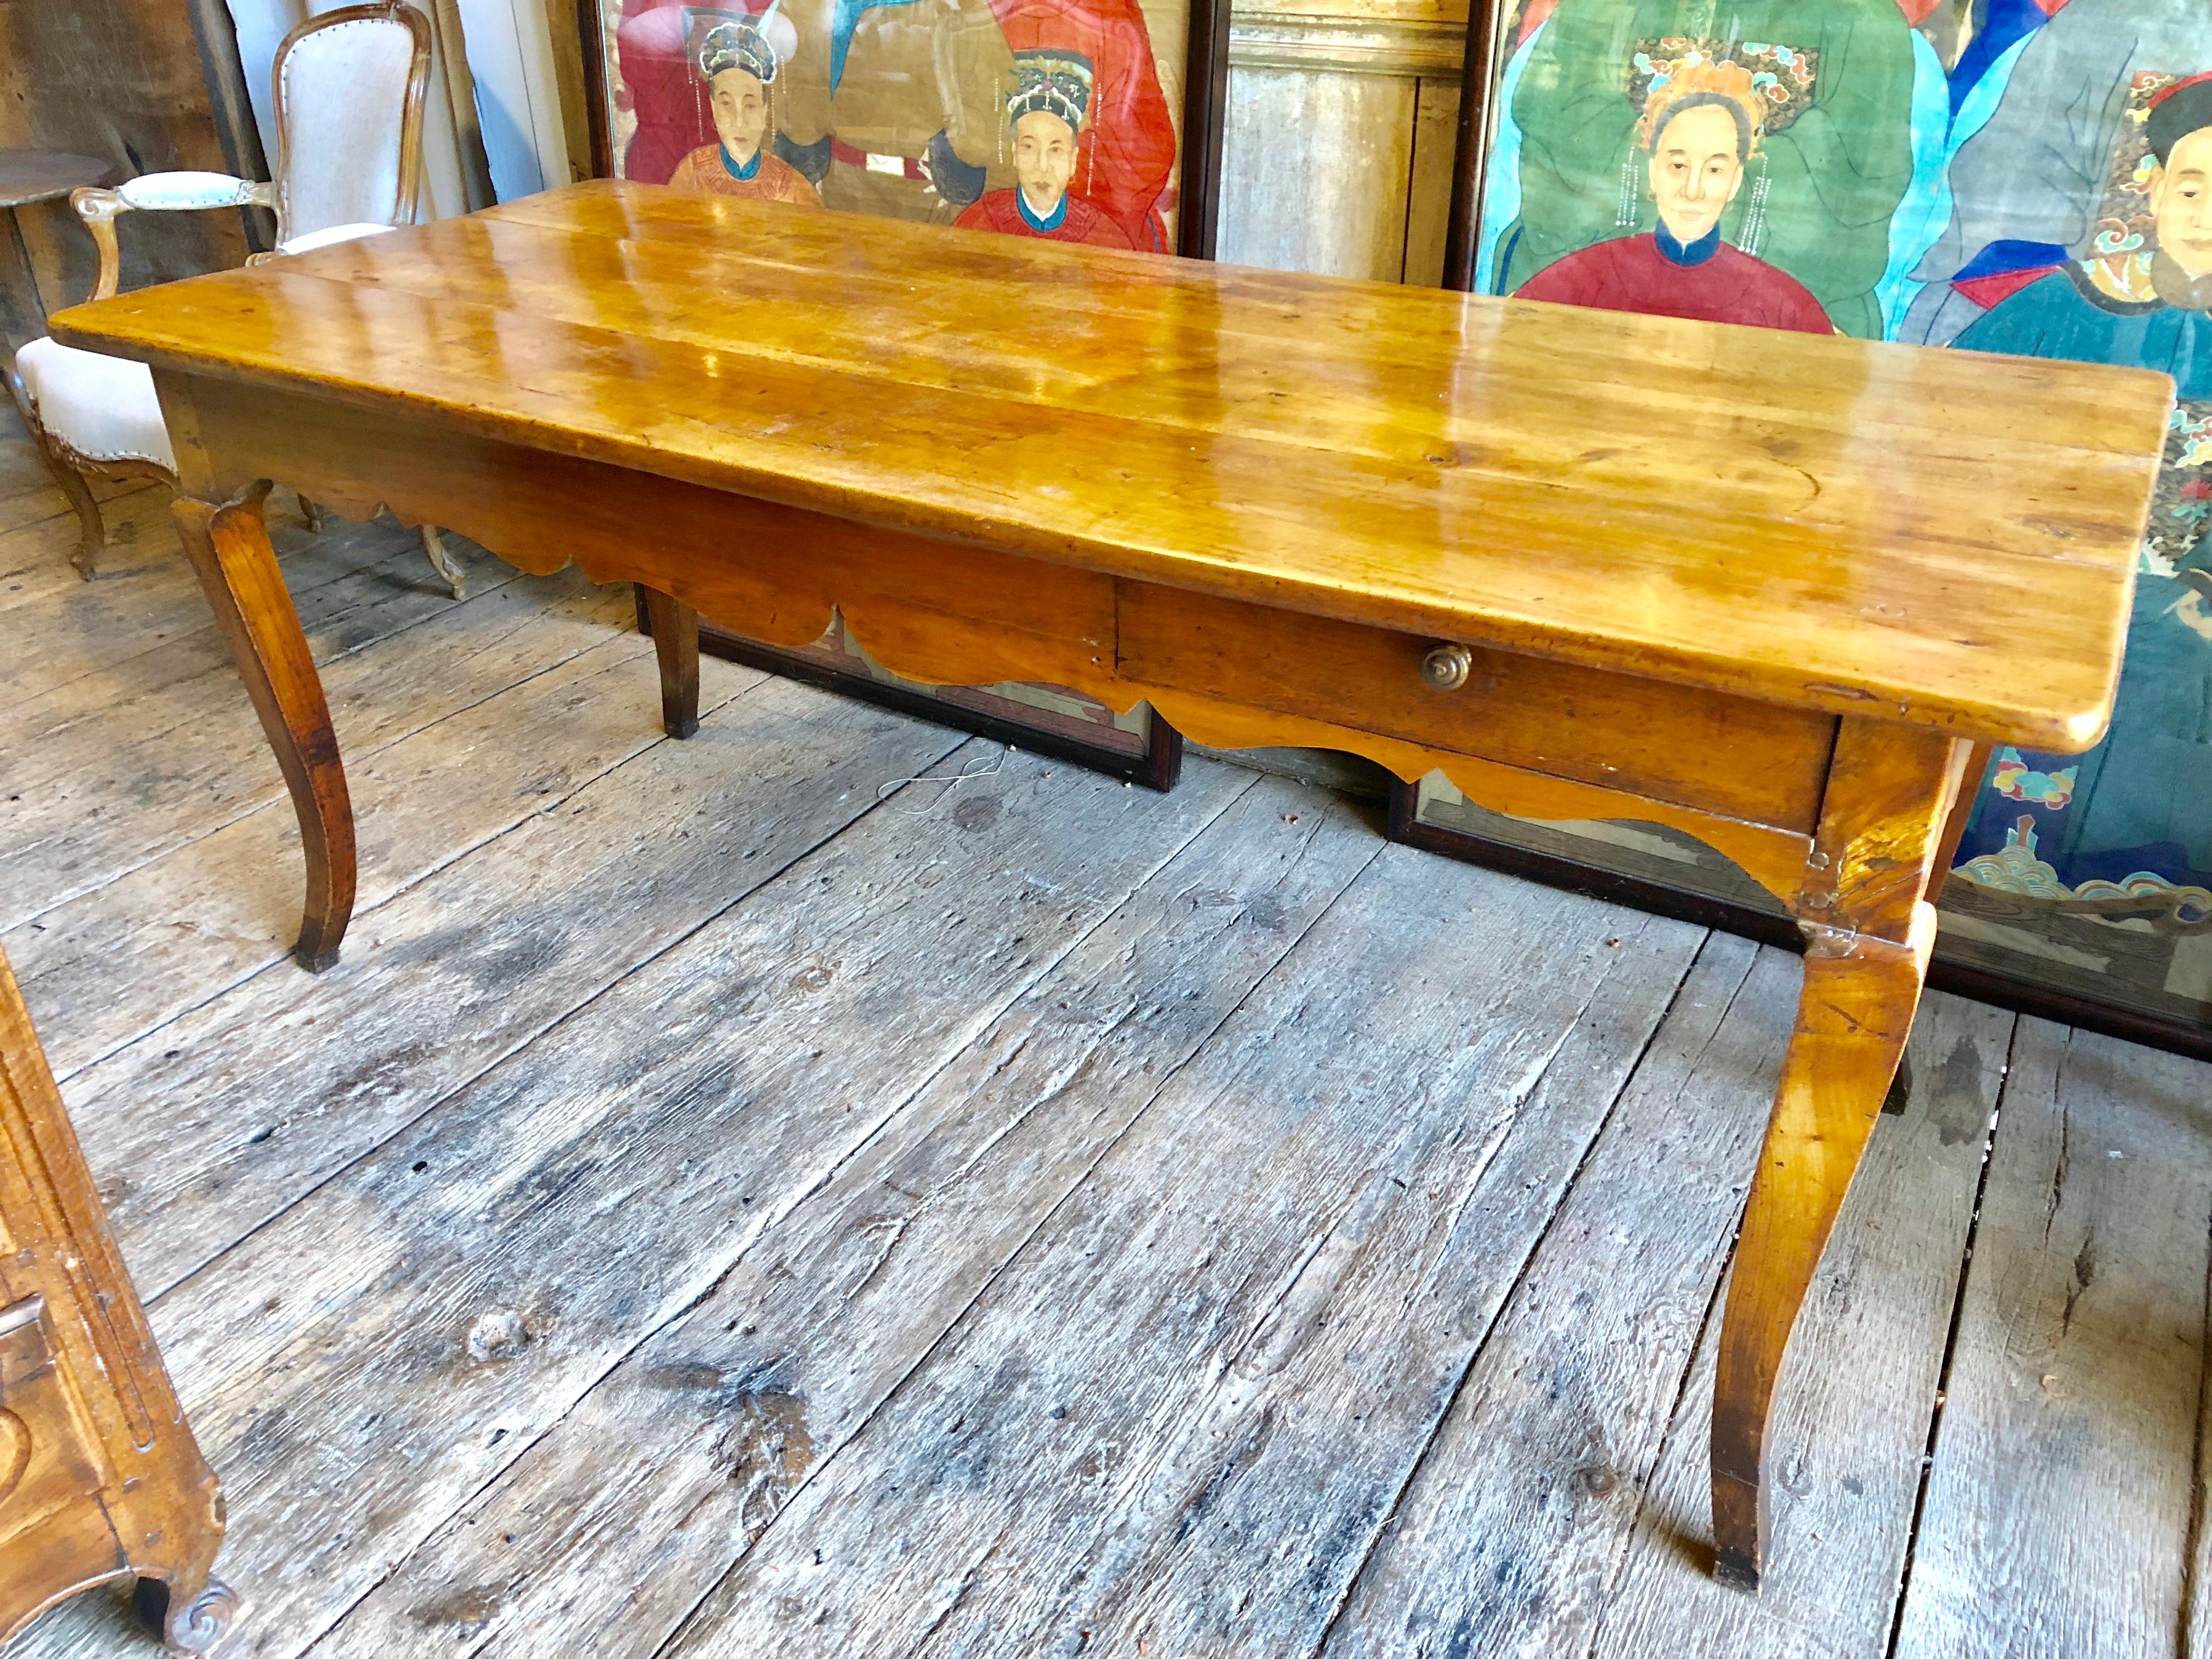 A beautiful French Country farm table, Louis XV period, circa 1770, in cherrywood, with a drawer on the side and cutting board on one end. Nice honey colored with old patina. Measure: Height to bottom of apron: 23.5”.